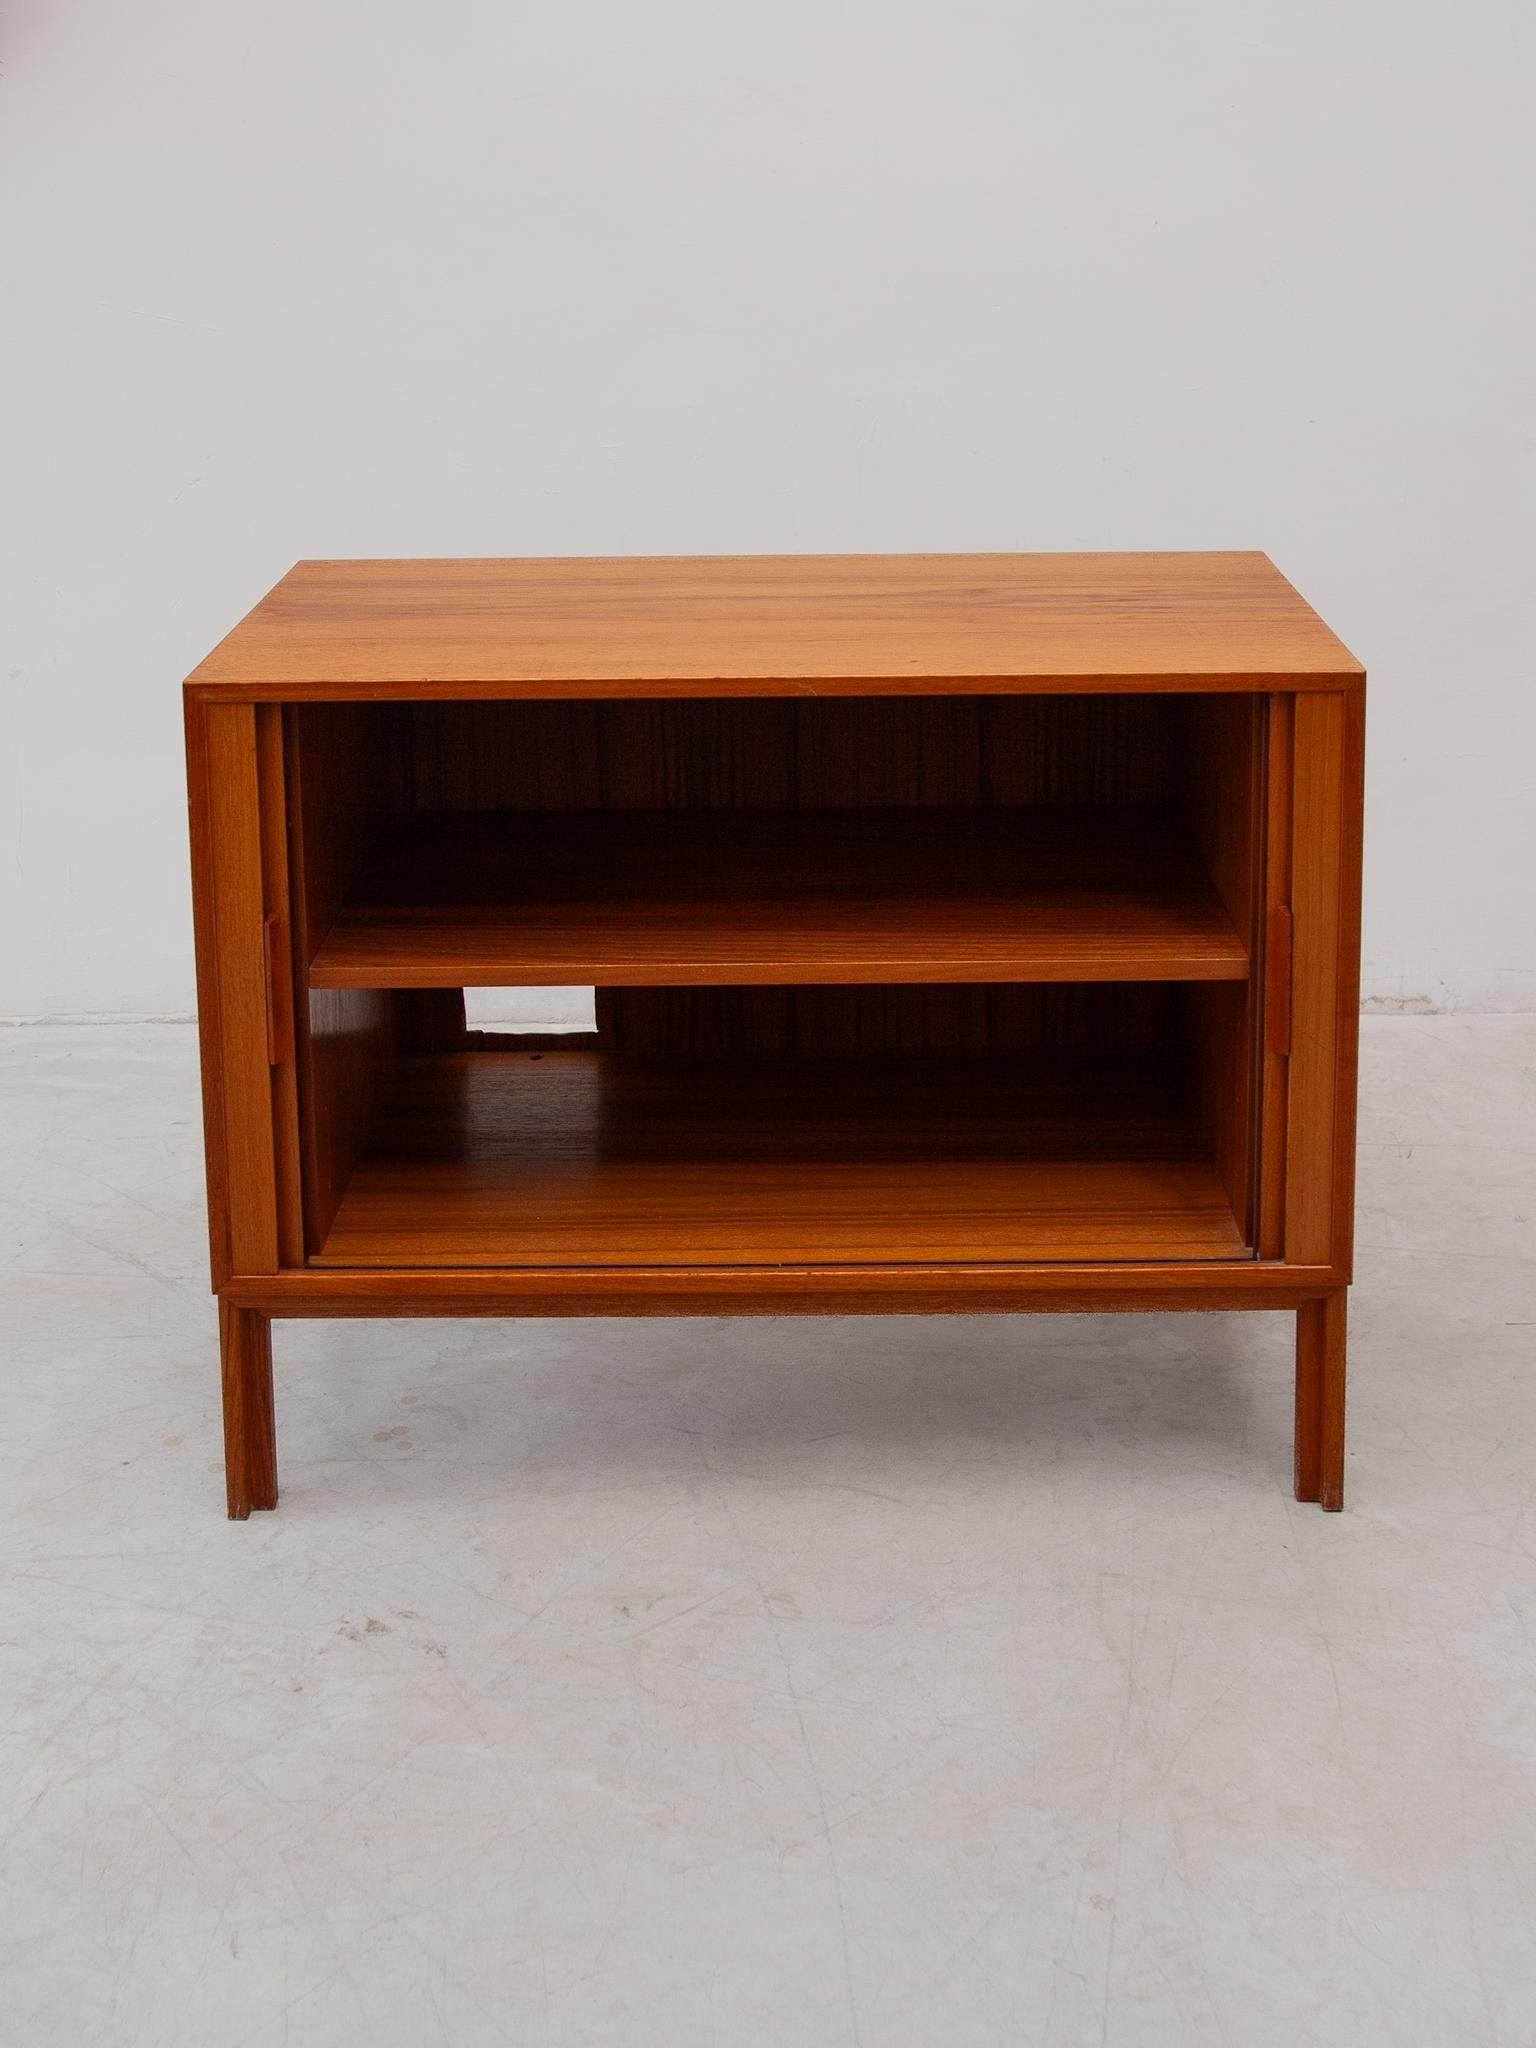 Modular Sideboard with Sliding Doors designed by Kai Kristiansen 1970s For Sale 2